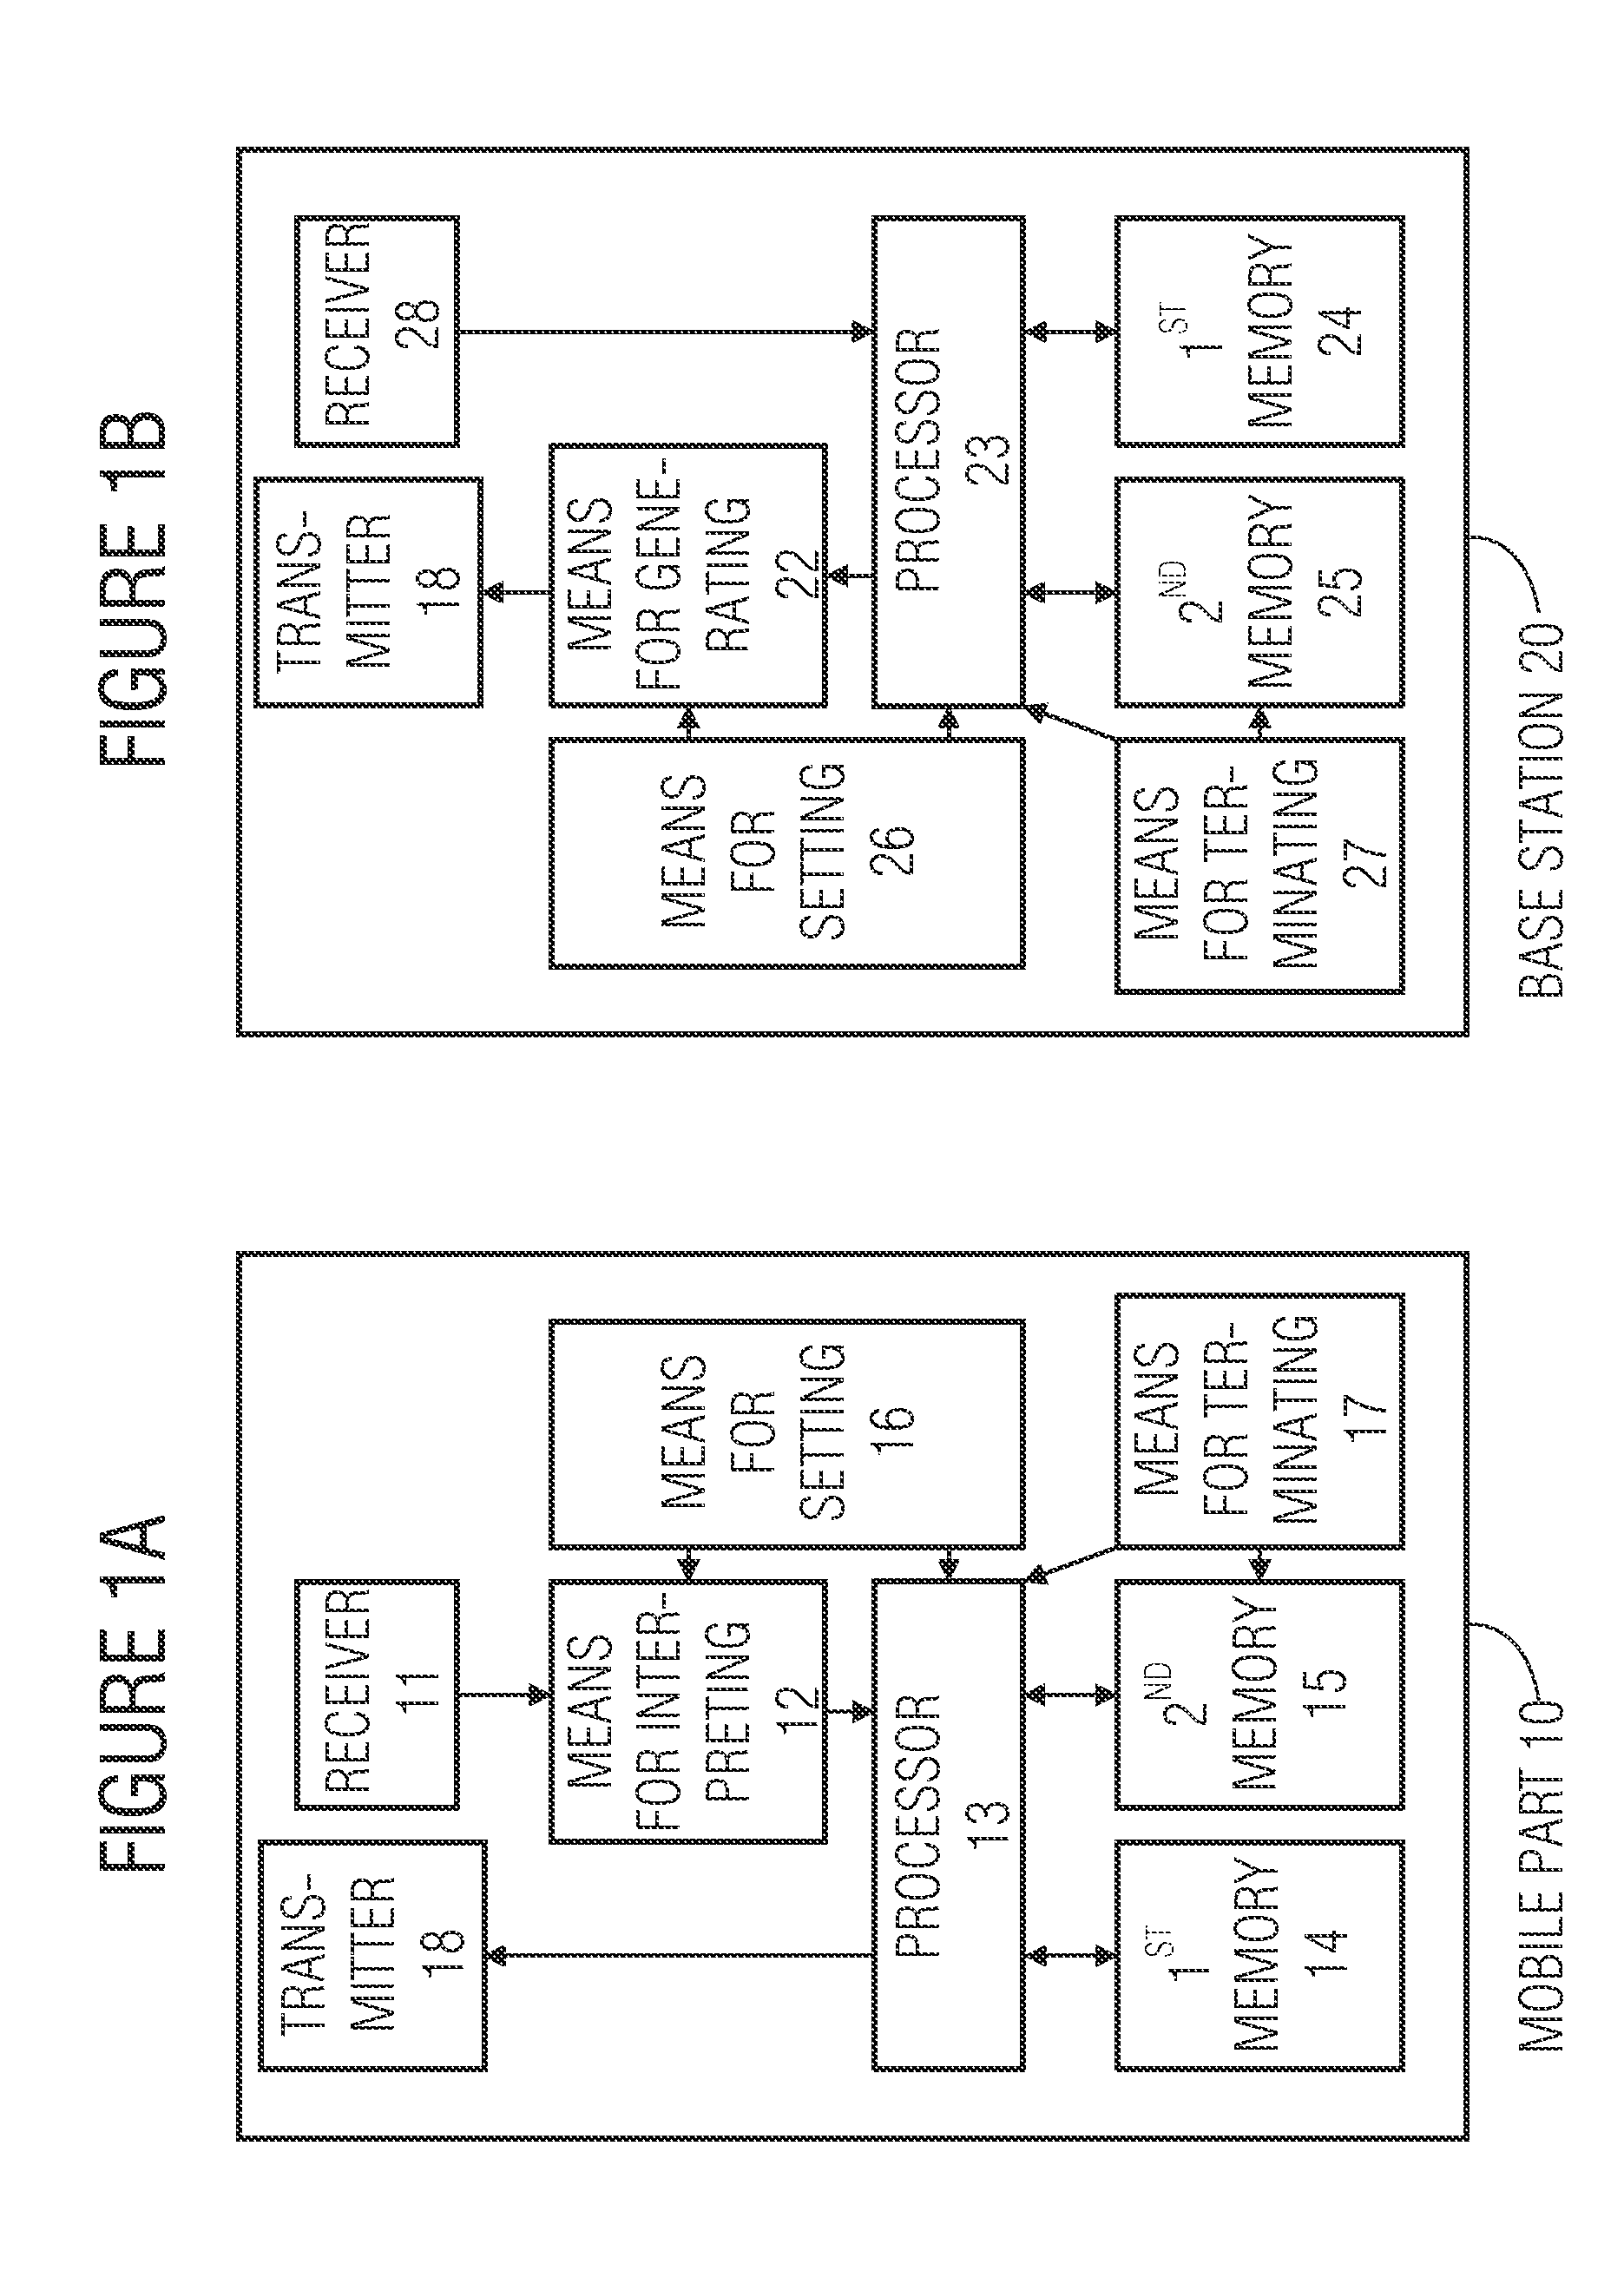 Mobile device and base station for a communication protocol with normal login and temporary login